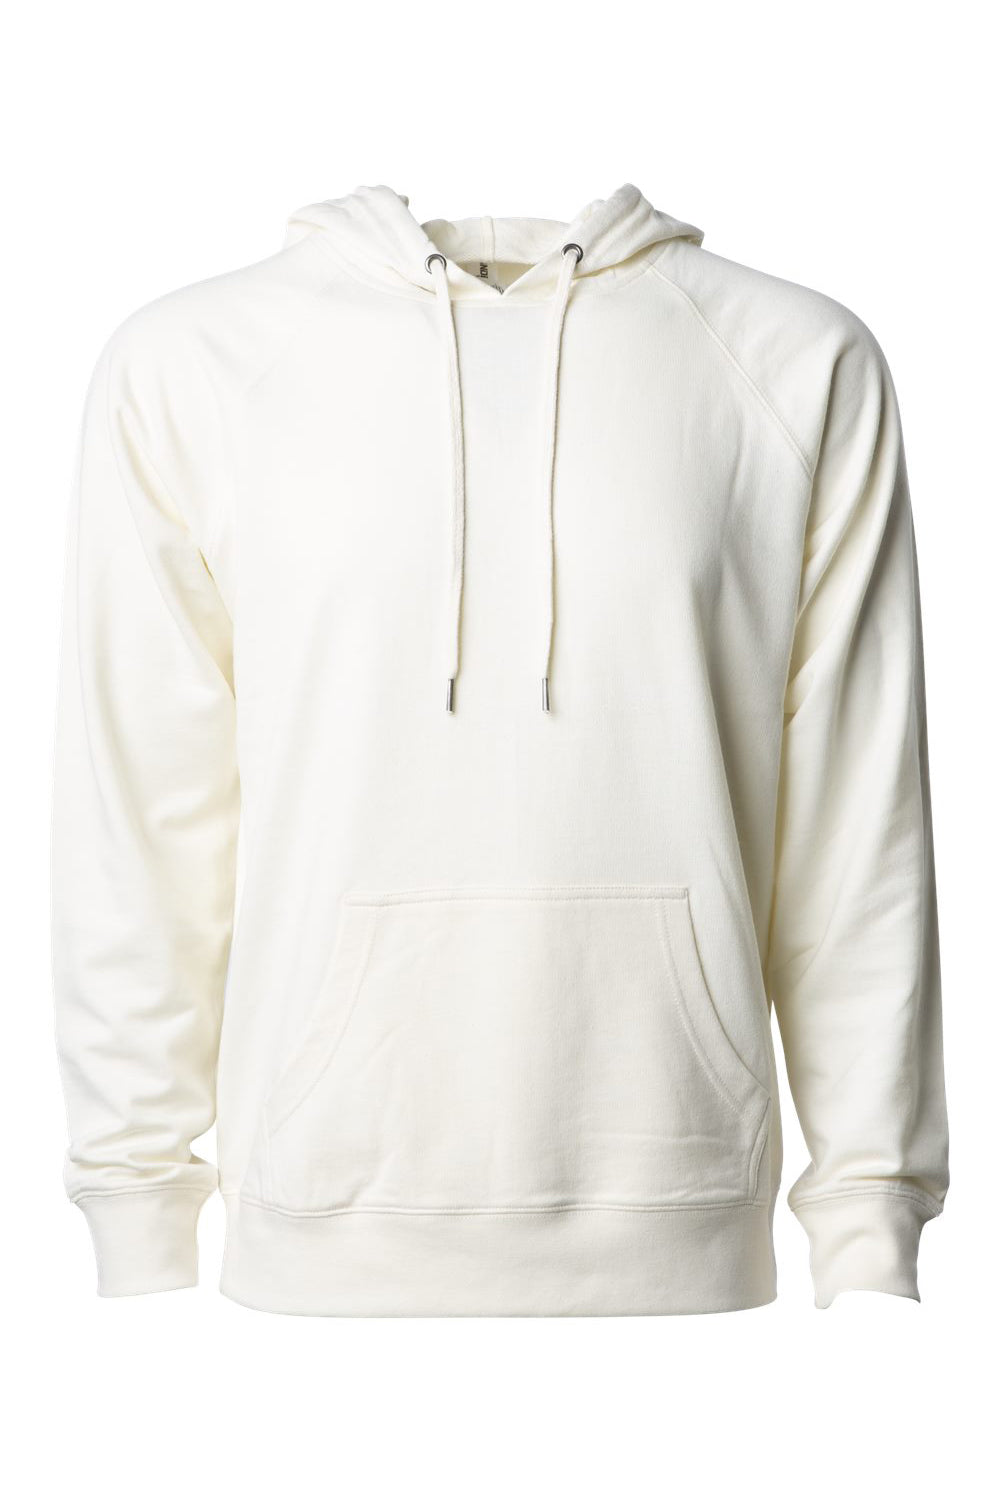 Independent Trading Co. SS1000 Mens Icon Loopback Terry Hooded Sweatshirt Hoodie Bone Flat Front